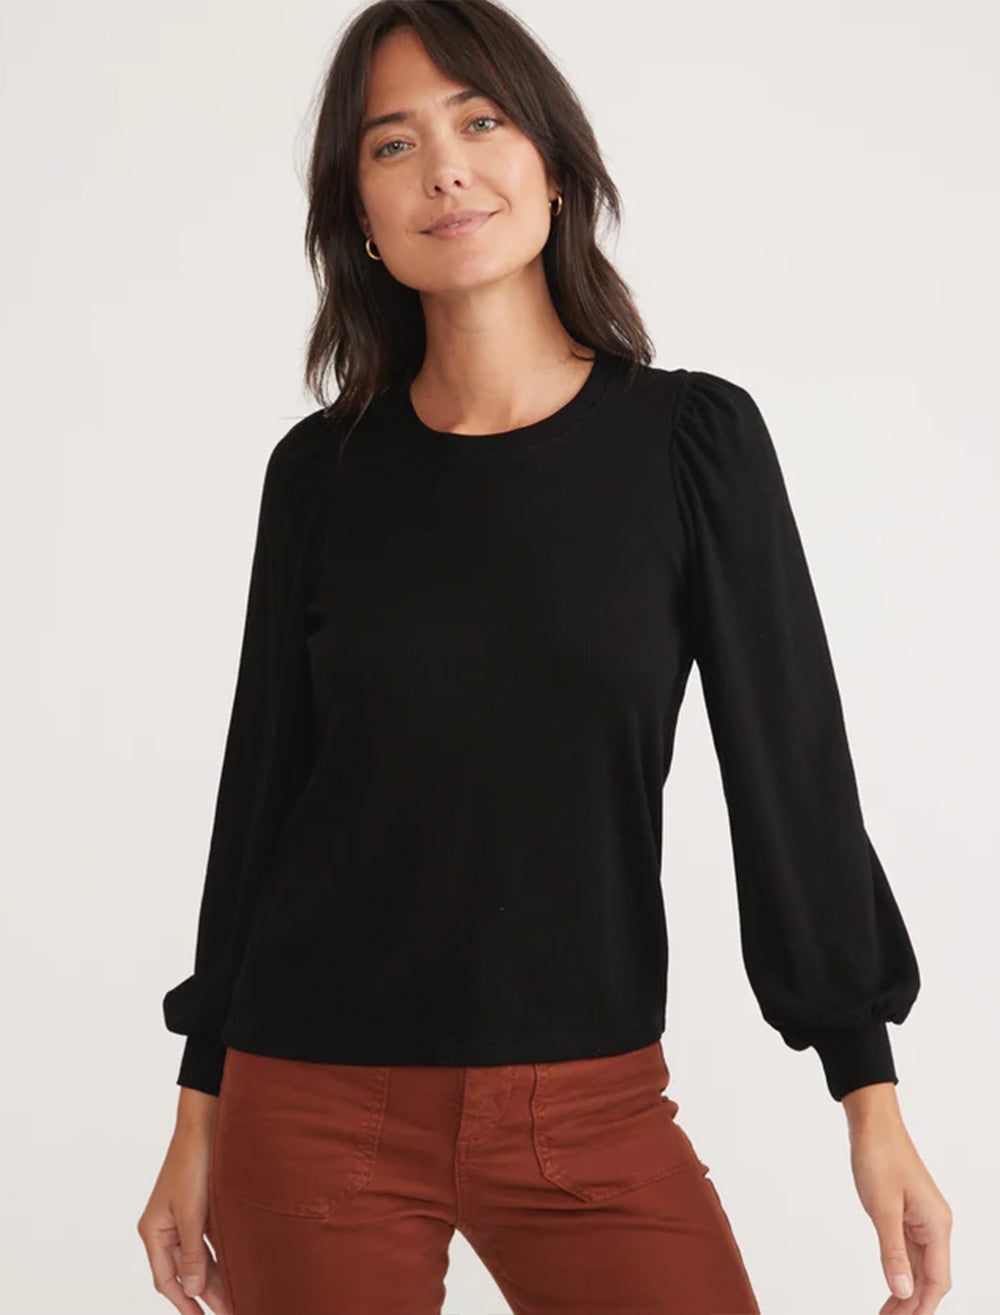 Model wearing marine layer's lexi puff sleeve top in black.